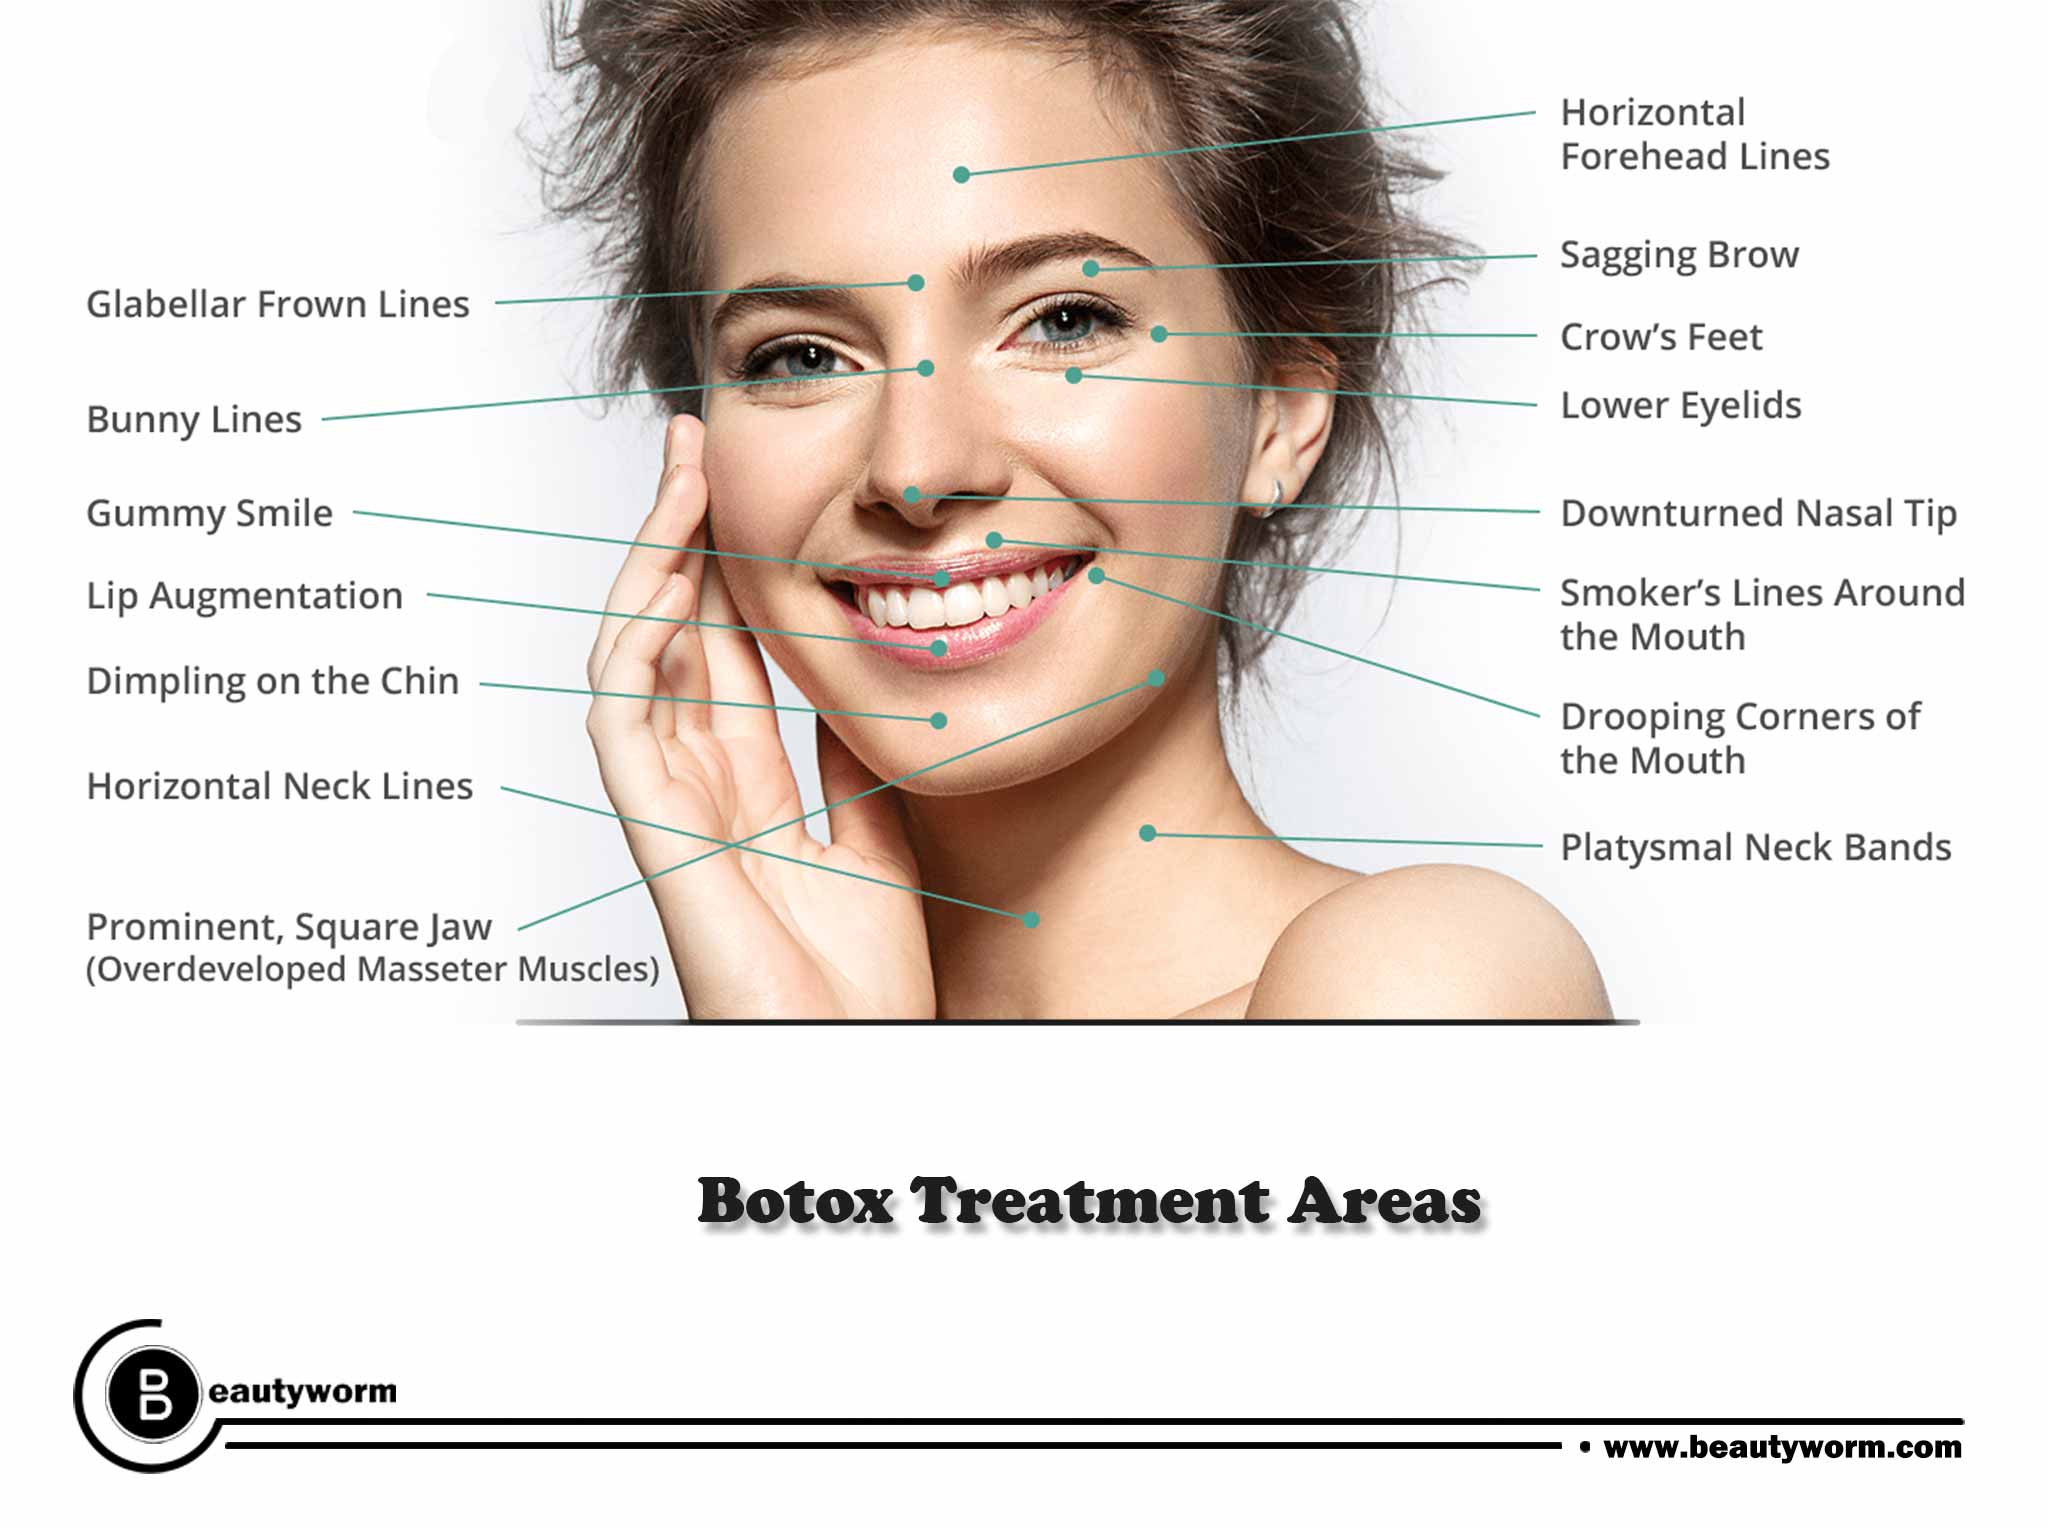 What is Botox used for?